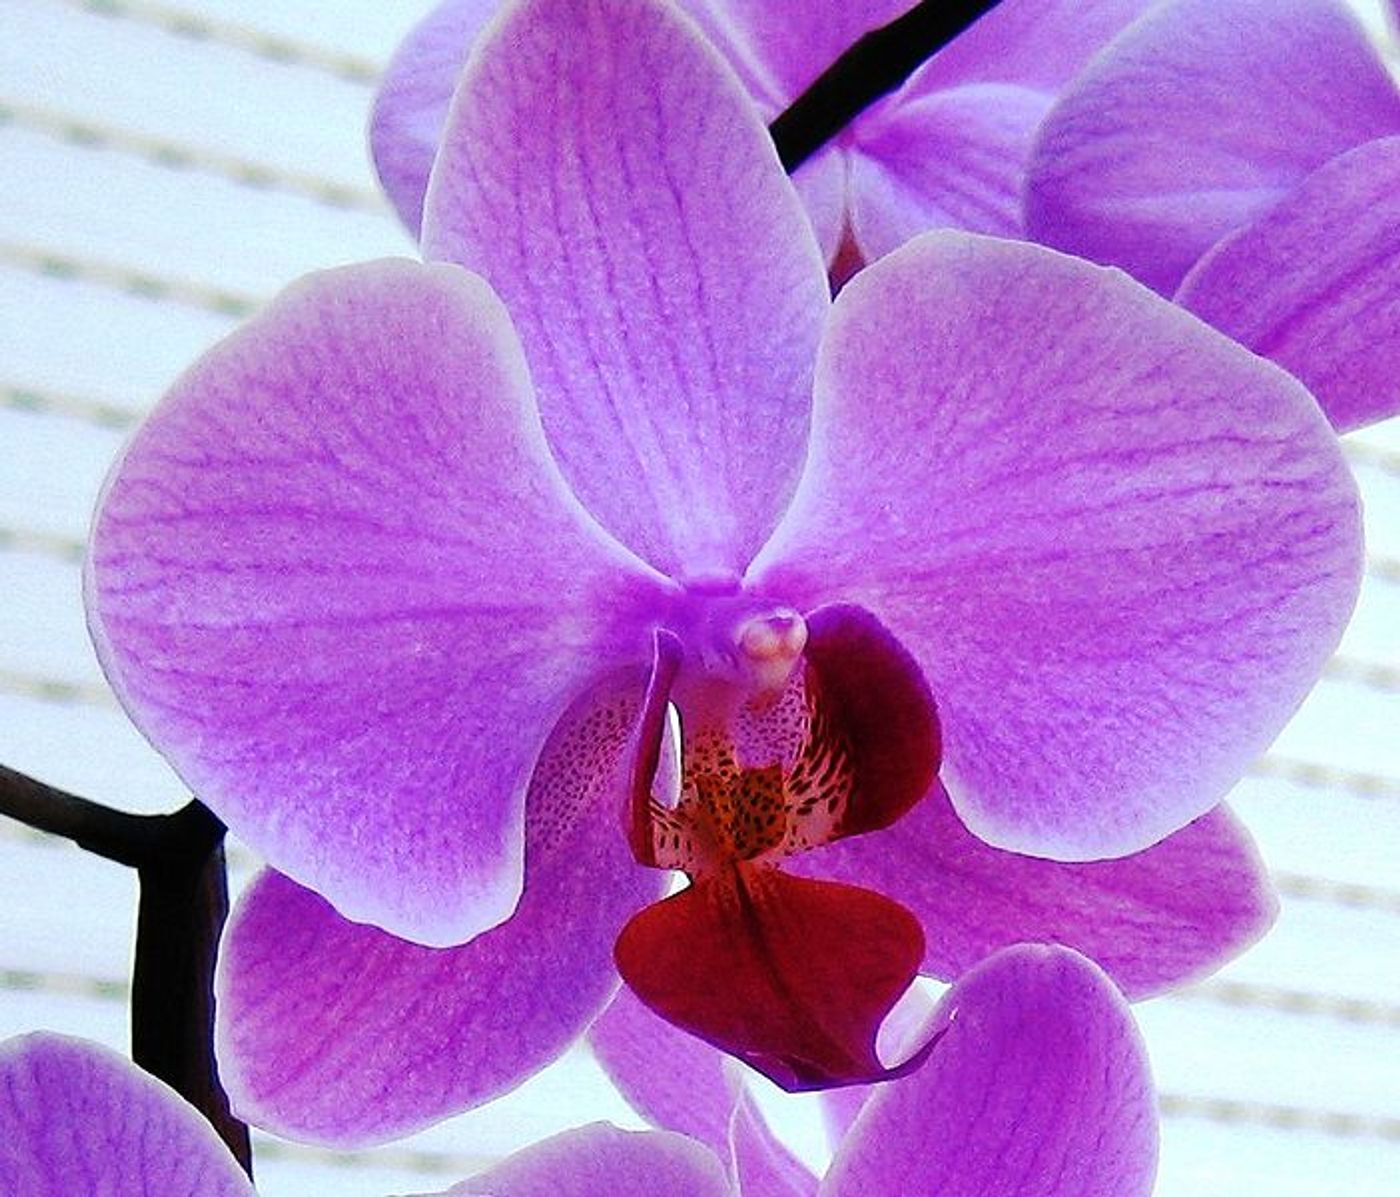 A phalaenopsis orchid in bright purple tones